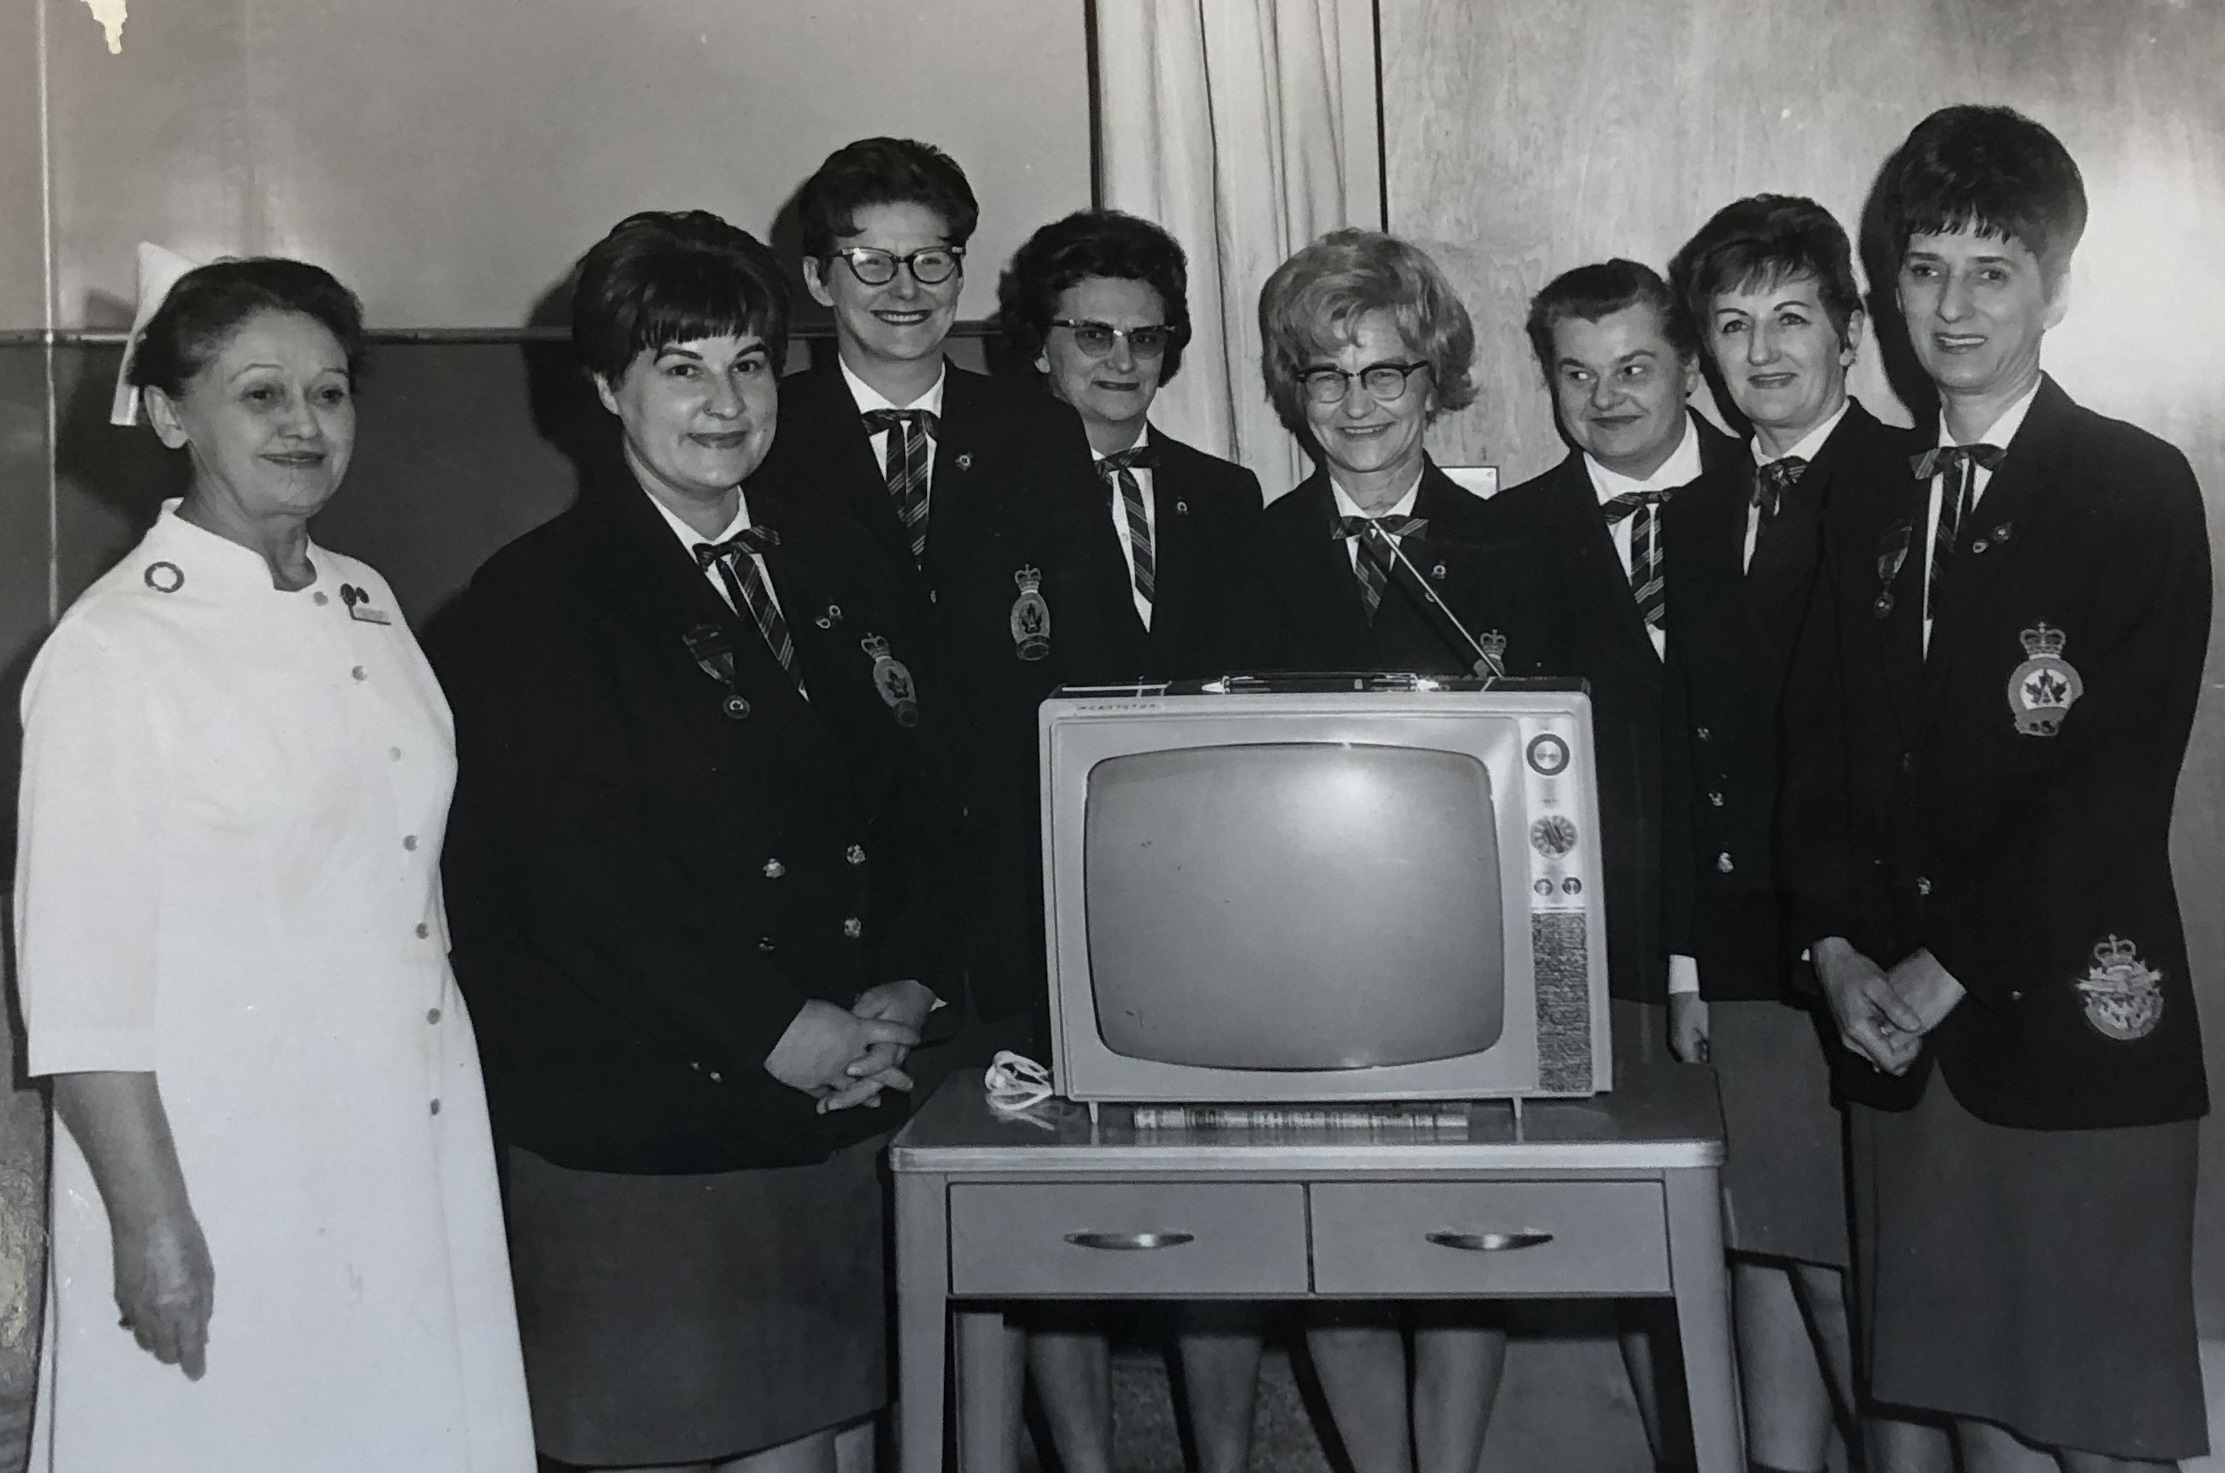 A black and white photograph showing seven women in dark Women’s Auxillary uniforms standing beside a woman in a white nurse’s uniform around a vintage television set placed on a small desk.